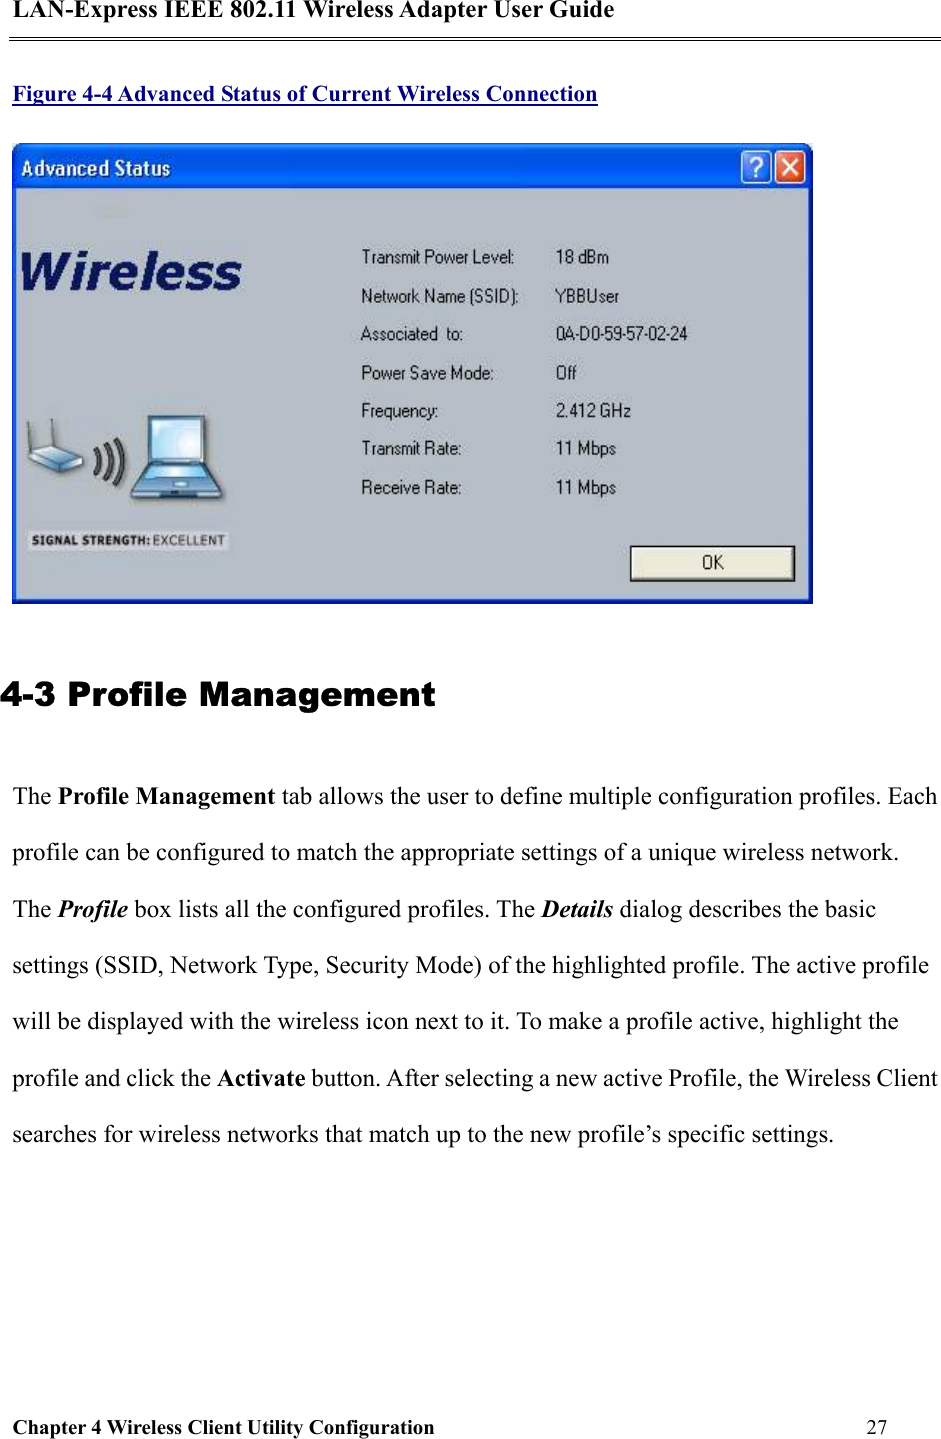 LAN-Express IEEE 802.11 Wireless Adapter User Guide Chapter 4 Wireless Client Utility Configuration   27  Figure 4-4 Advanced Status of Current Wireless Connection  4-3 Profile Management The Profile Management tab allows the user to define multiple configuration profiles. Each profile can be configured to match the appropriate settings of a unique wireless network. The Profile box lists all the configured profiles. The Details dialog describes the basic settings (SSID, Network Type, Security Mode) of the highlighted profile. The active profile will be displayed with the wireless icon next to it. To make a profile active, highlight the profile and click the Activate button. After selecting a new active Profile, the Wireless Client searches for wireless networks that match up to the new profile’s specific settings. 